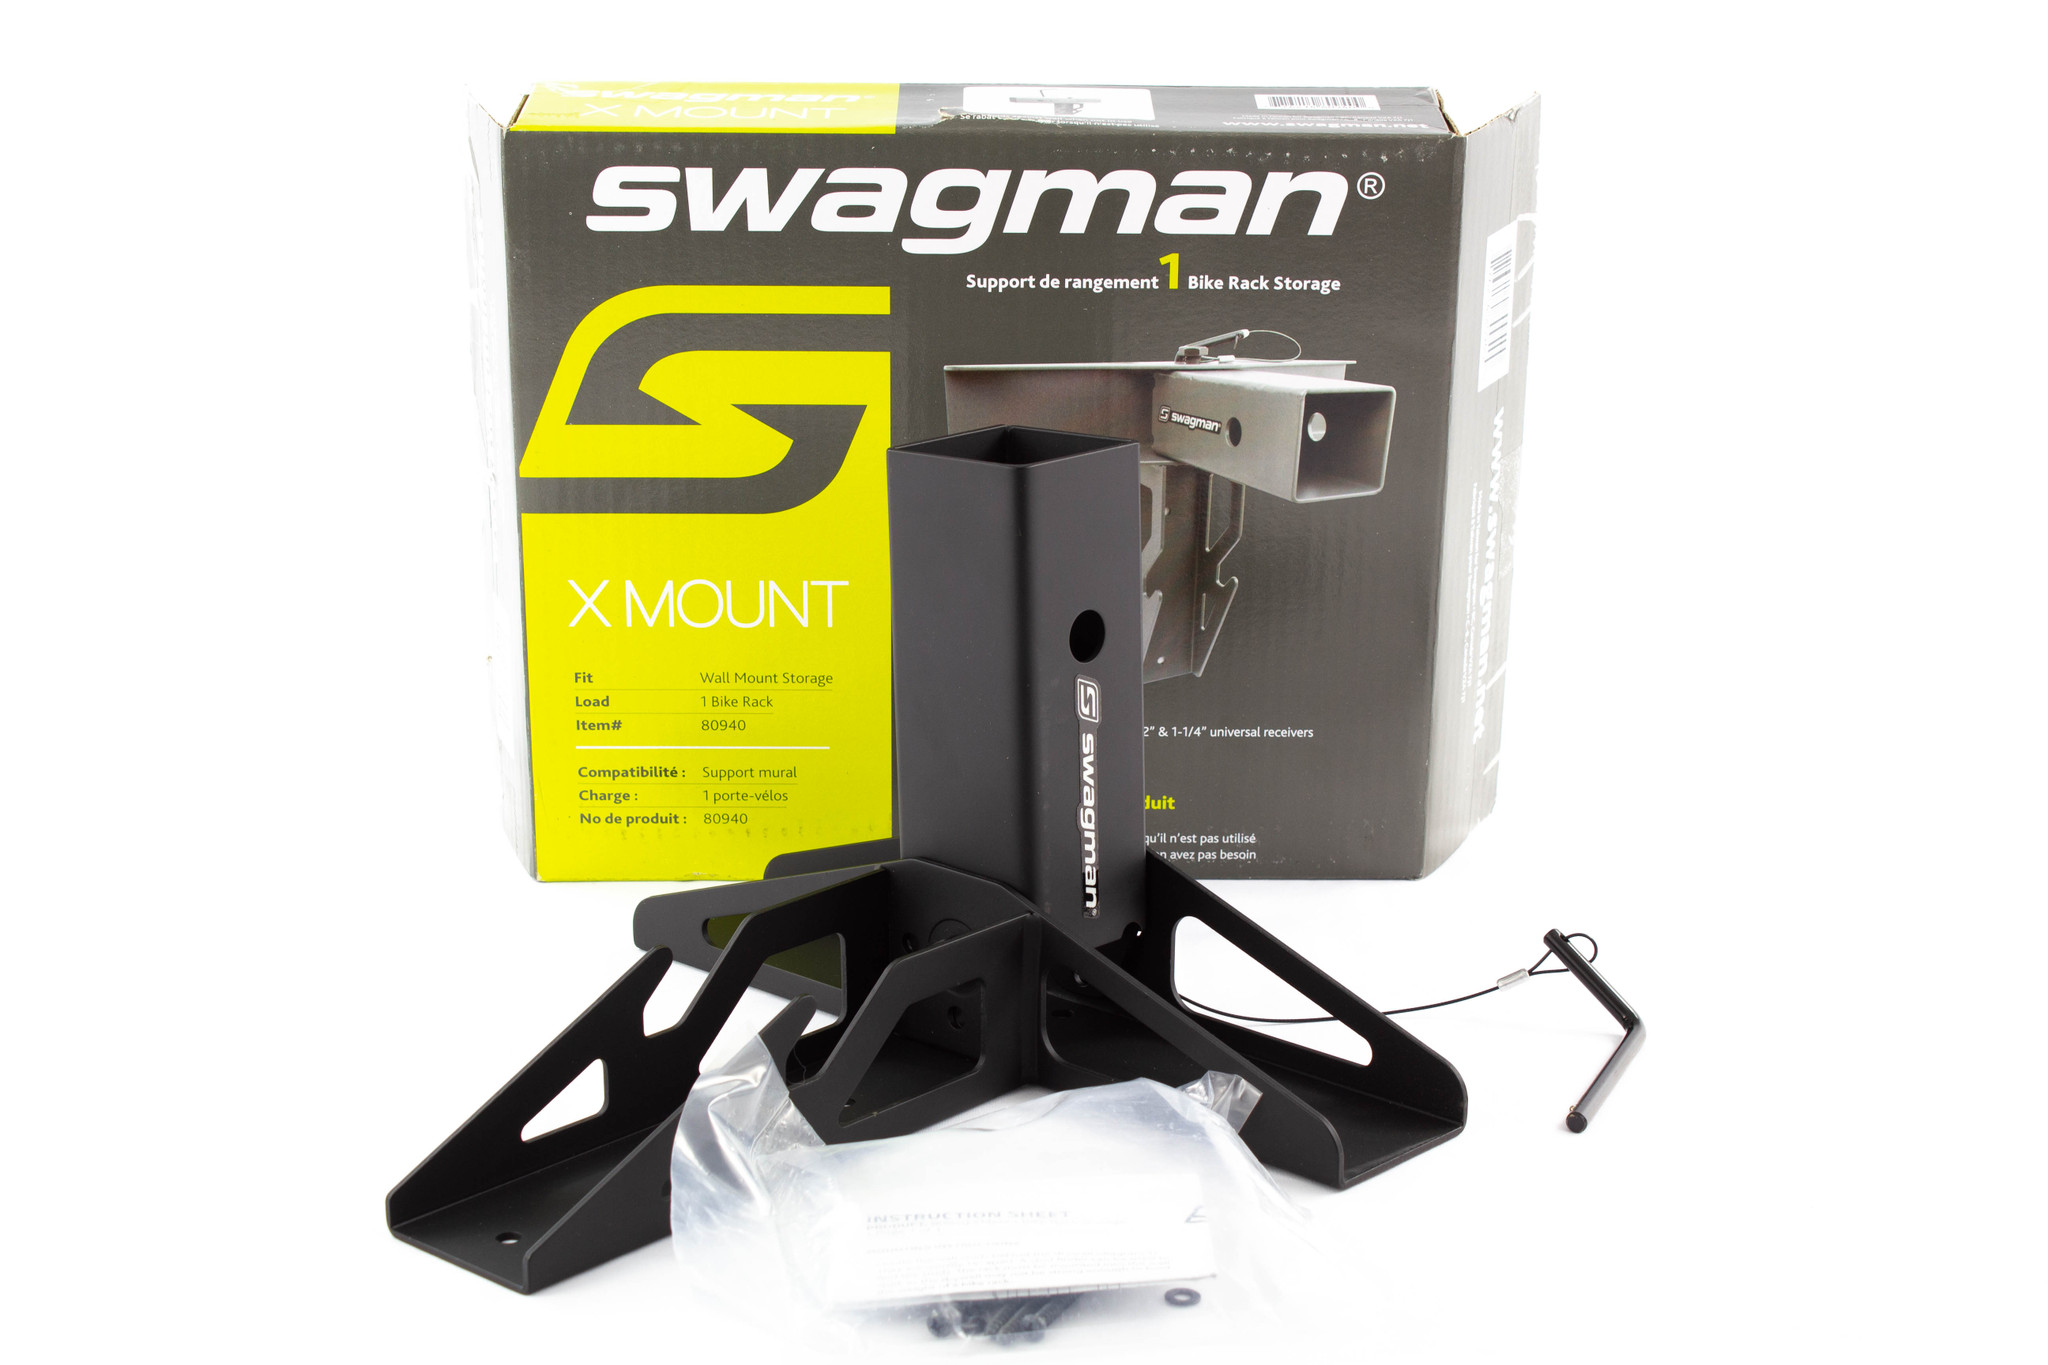 Featured Special: Swagman X Mount